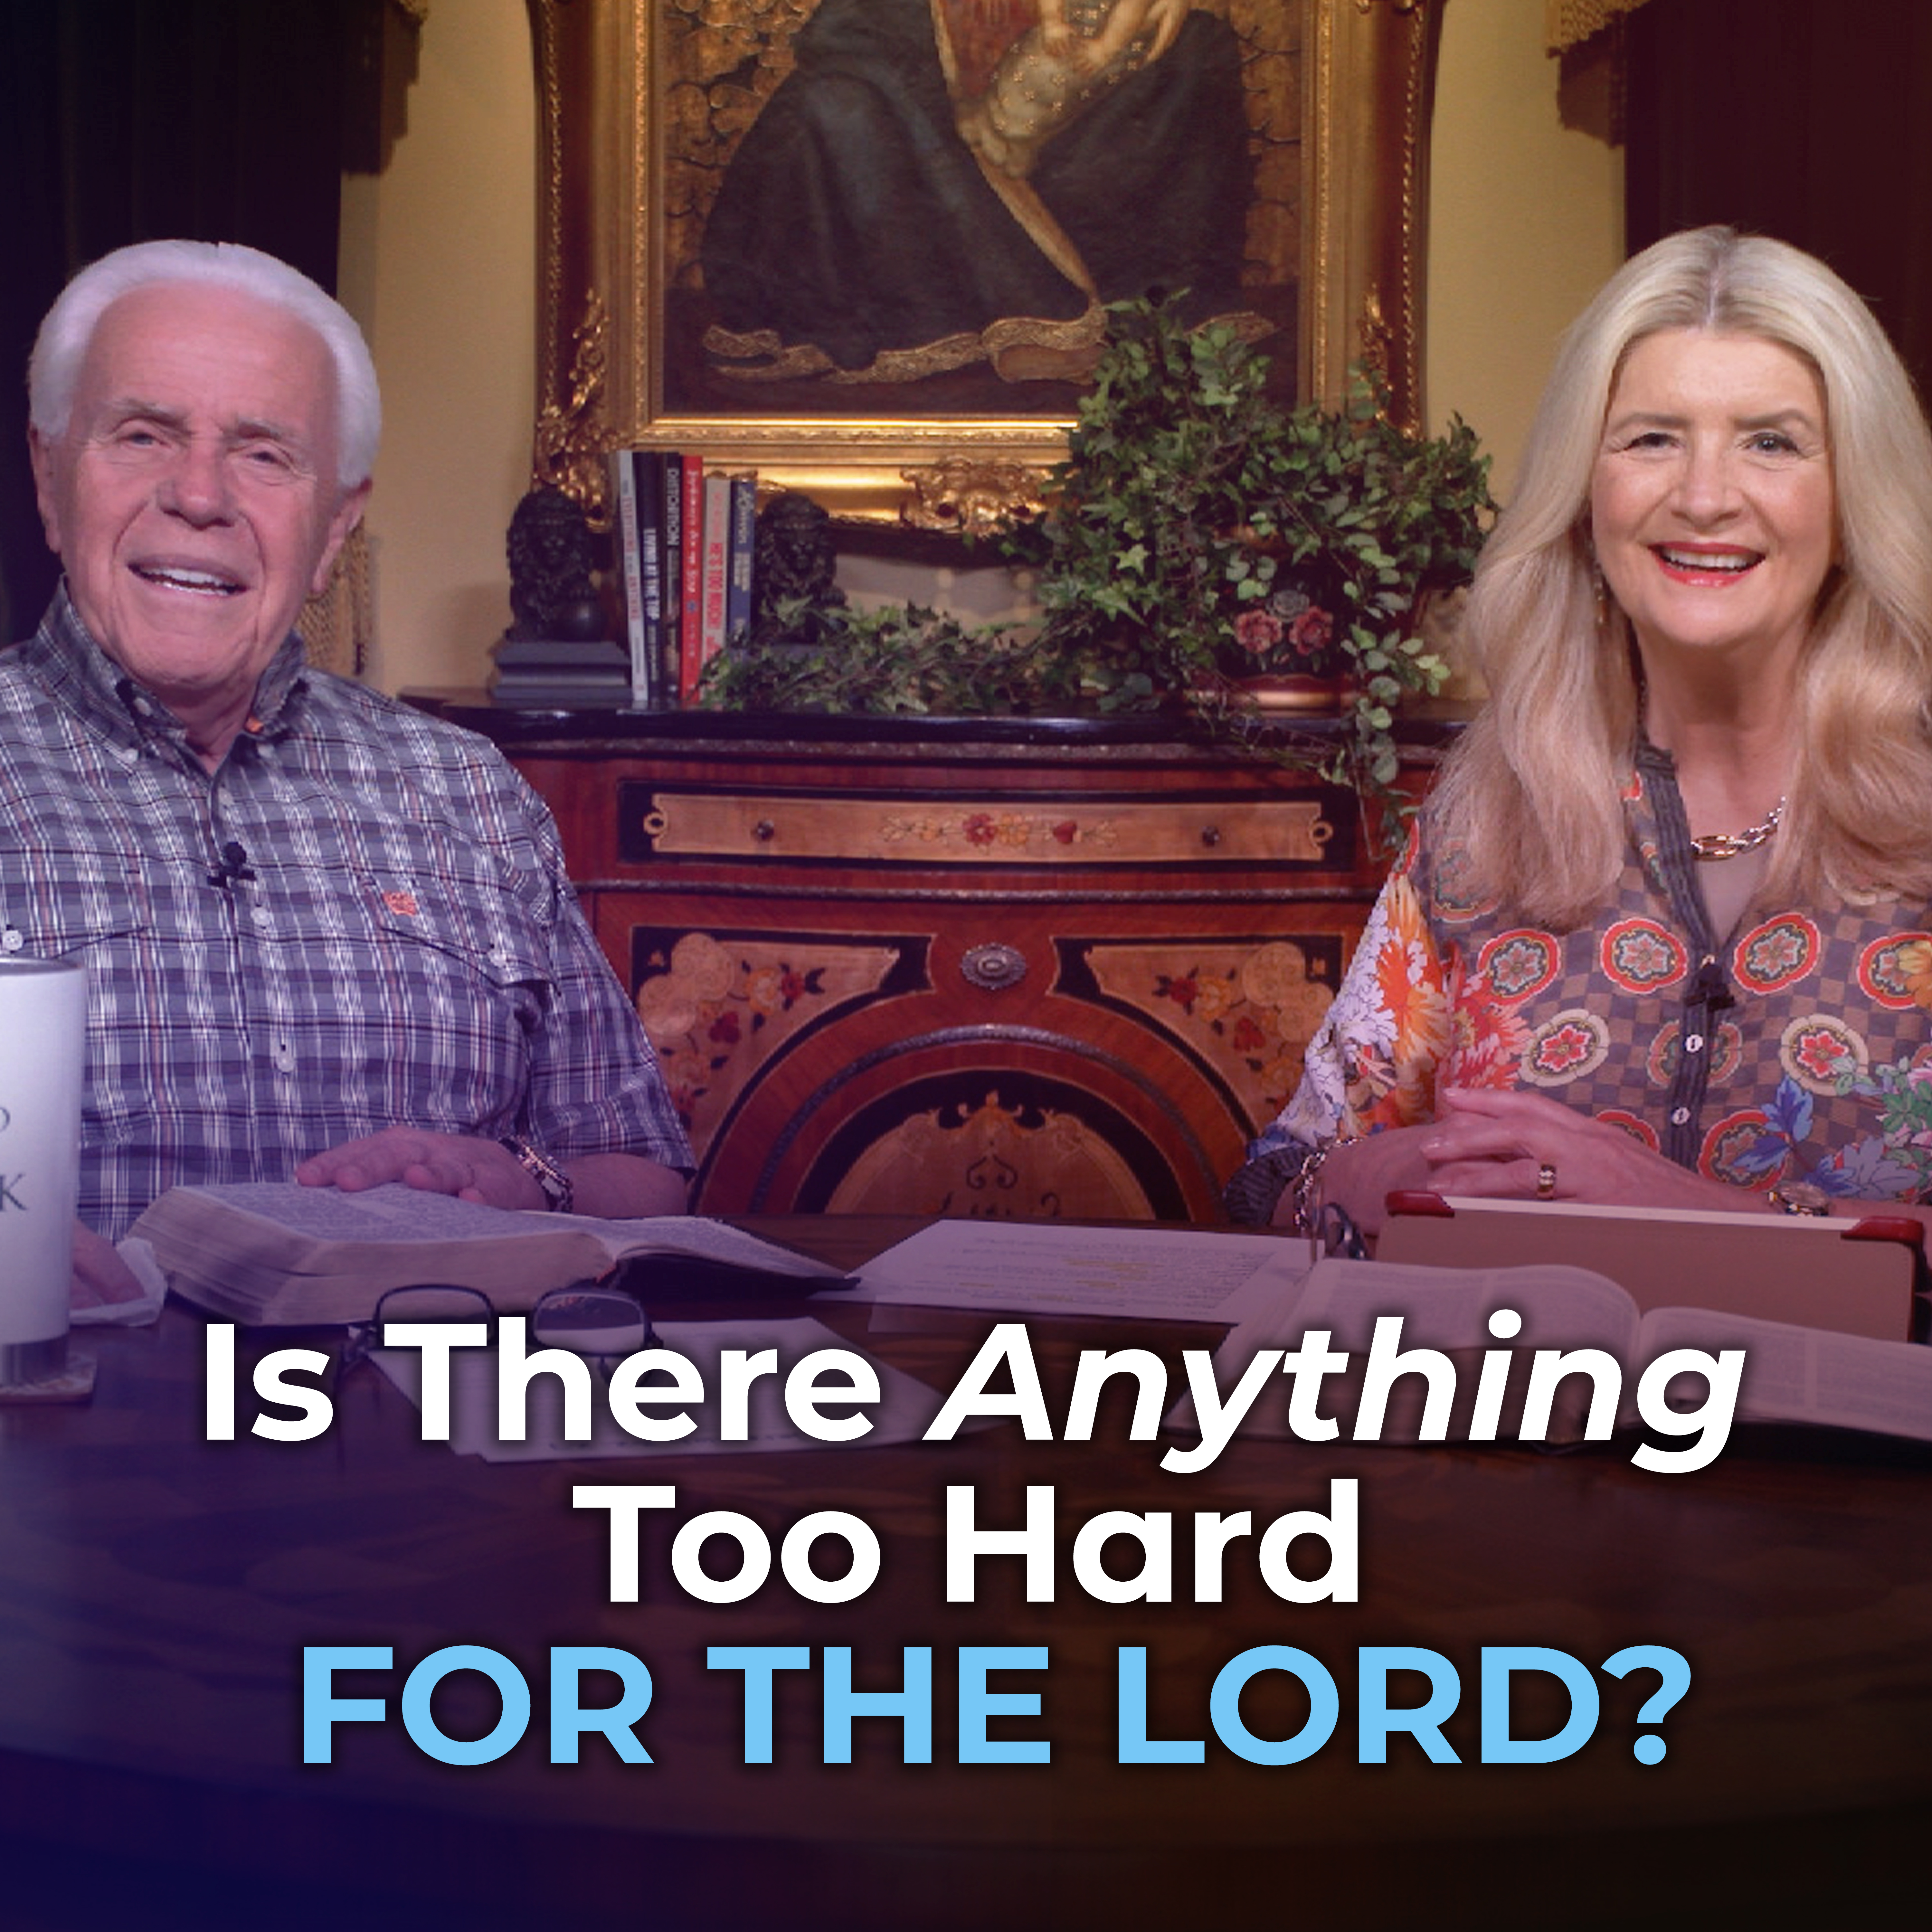 Is There Anything Too Hard For The Lord?